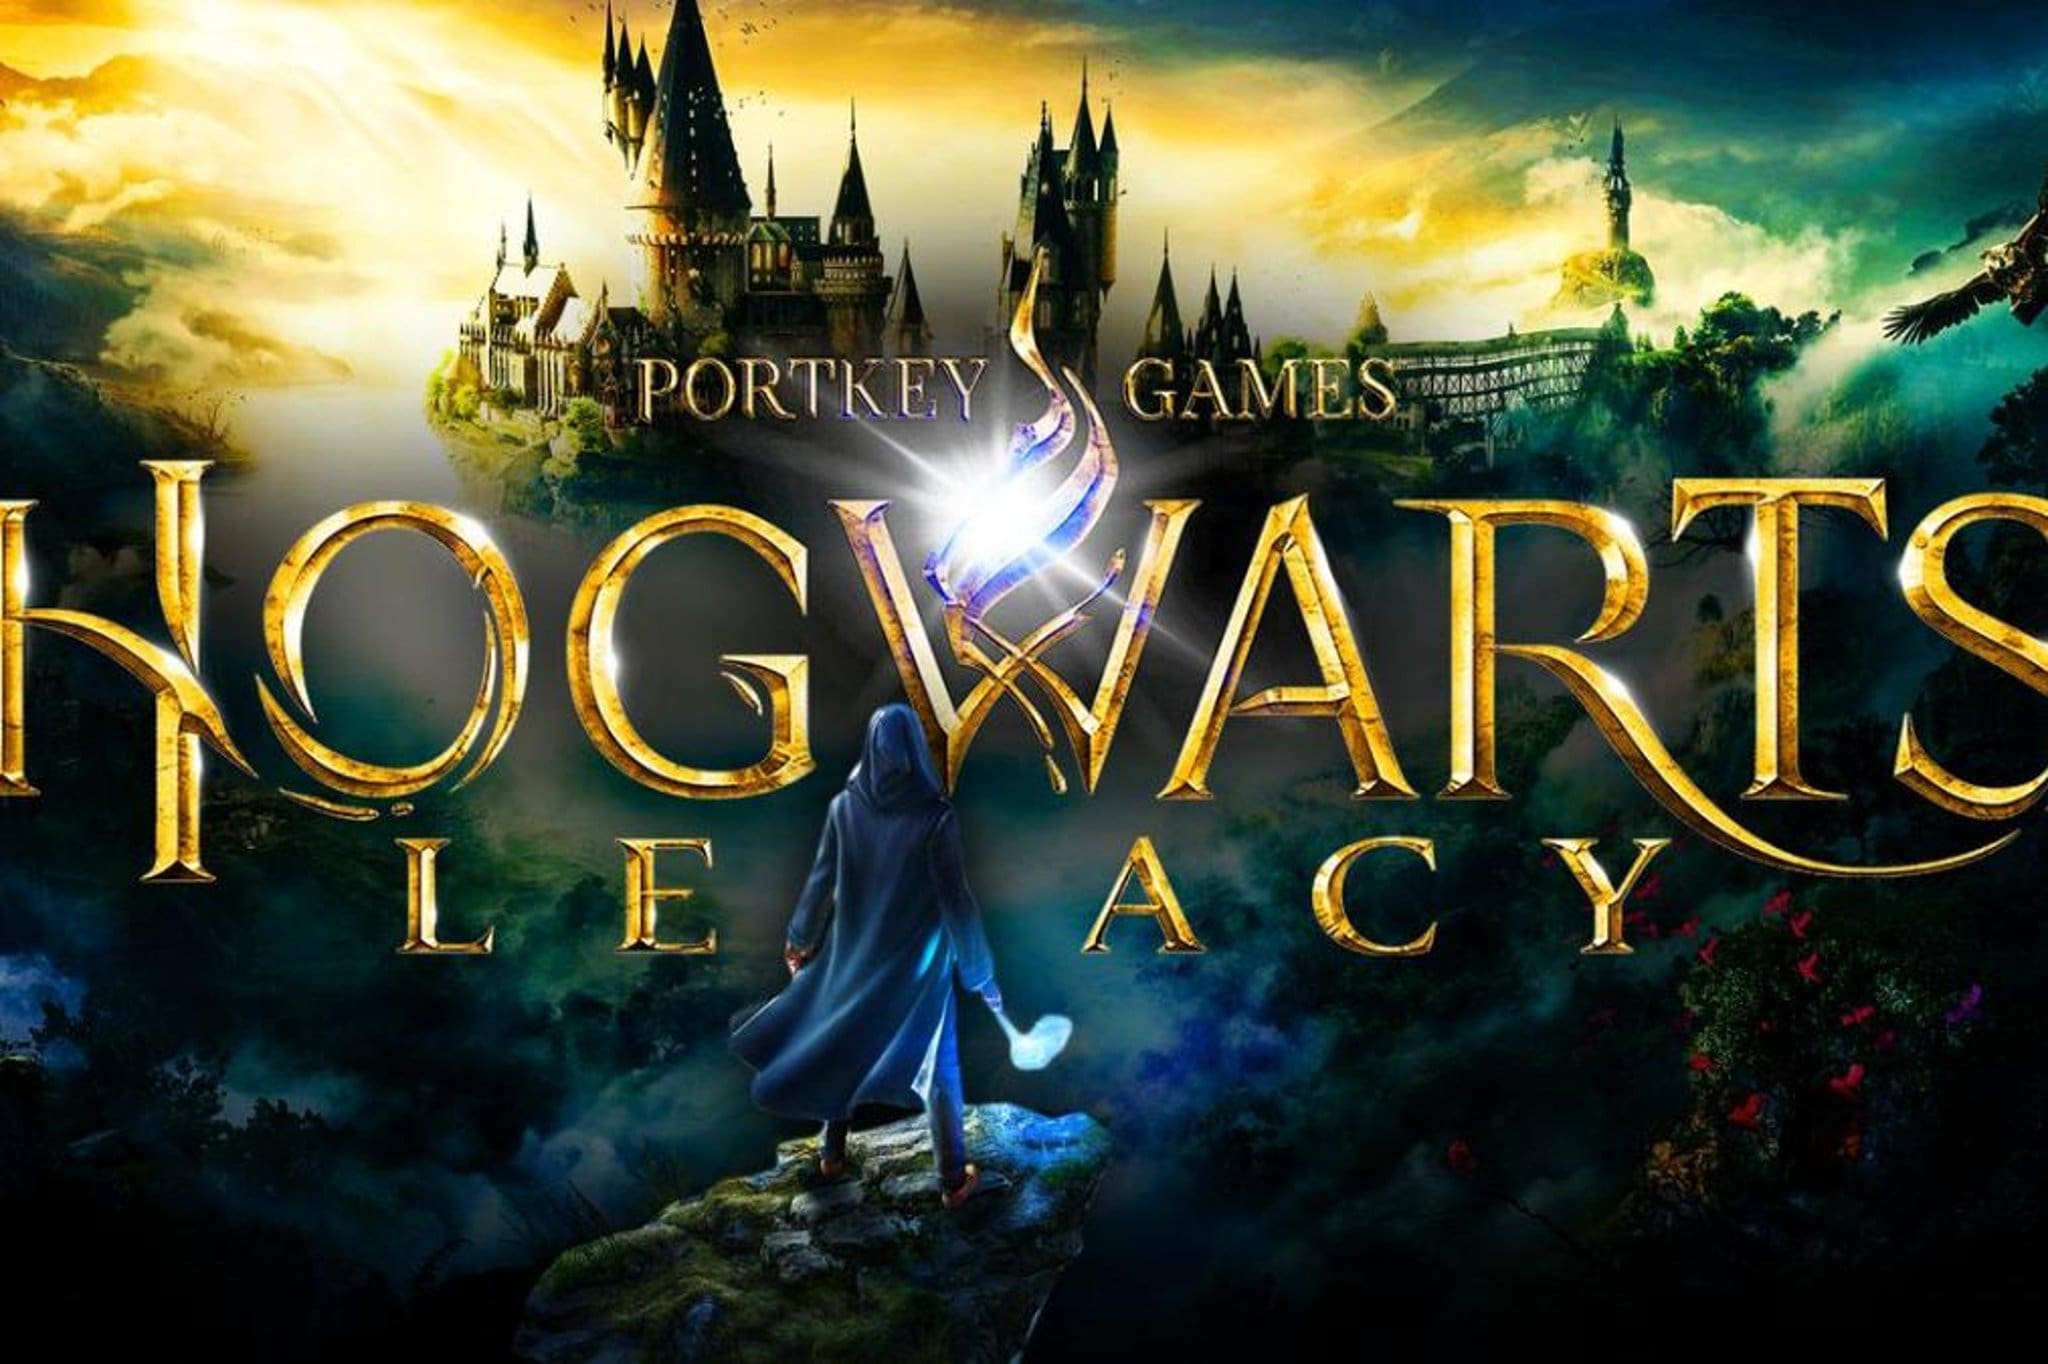 Hogwarts Legacy Preview - Video Game Reviews, News, Streams and more